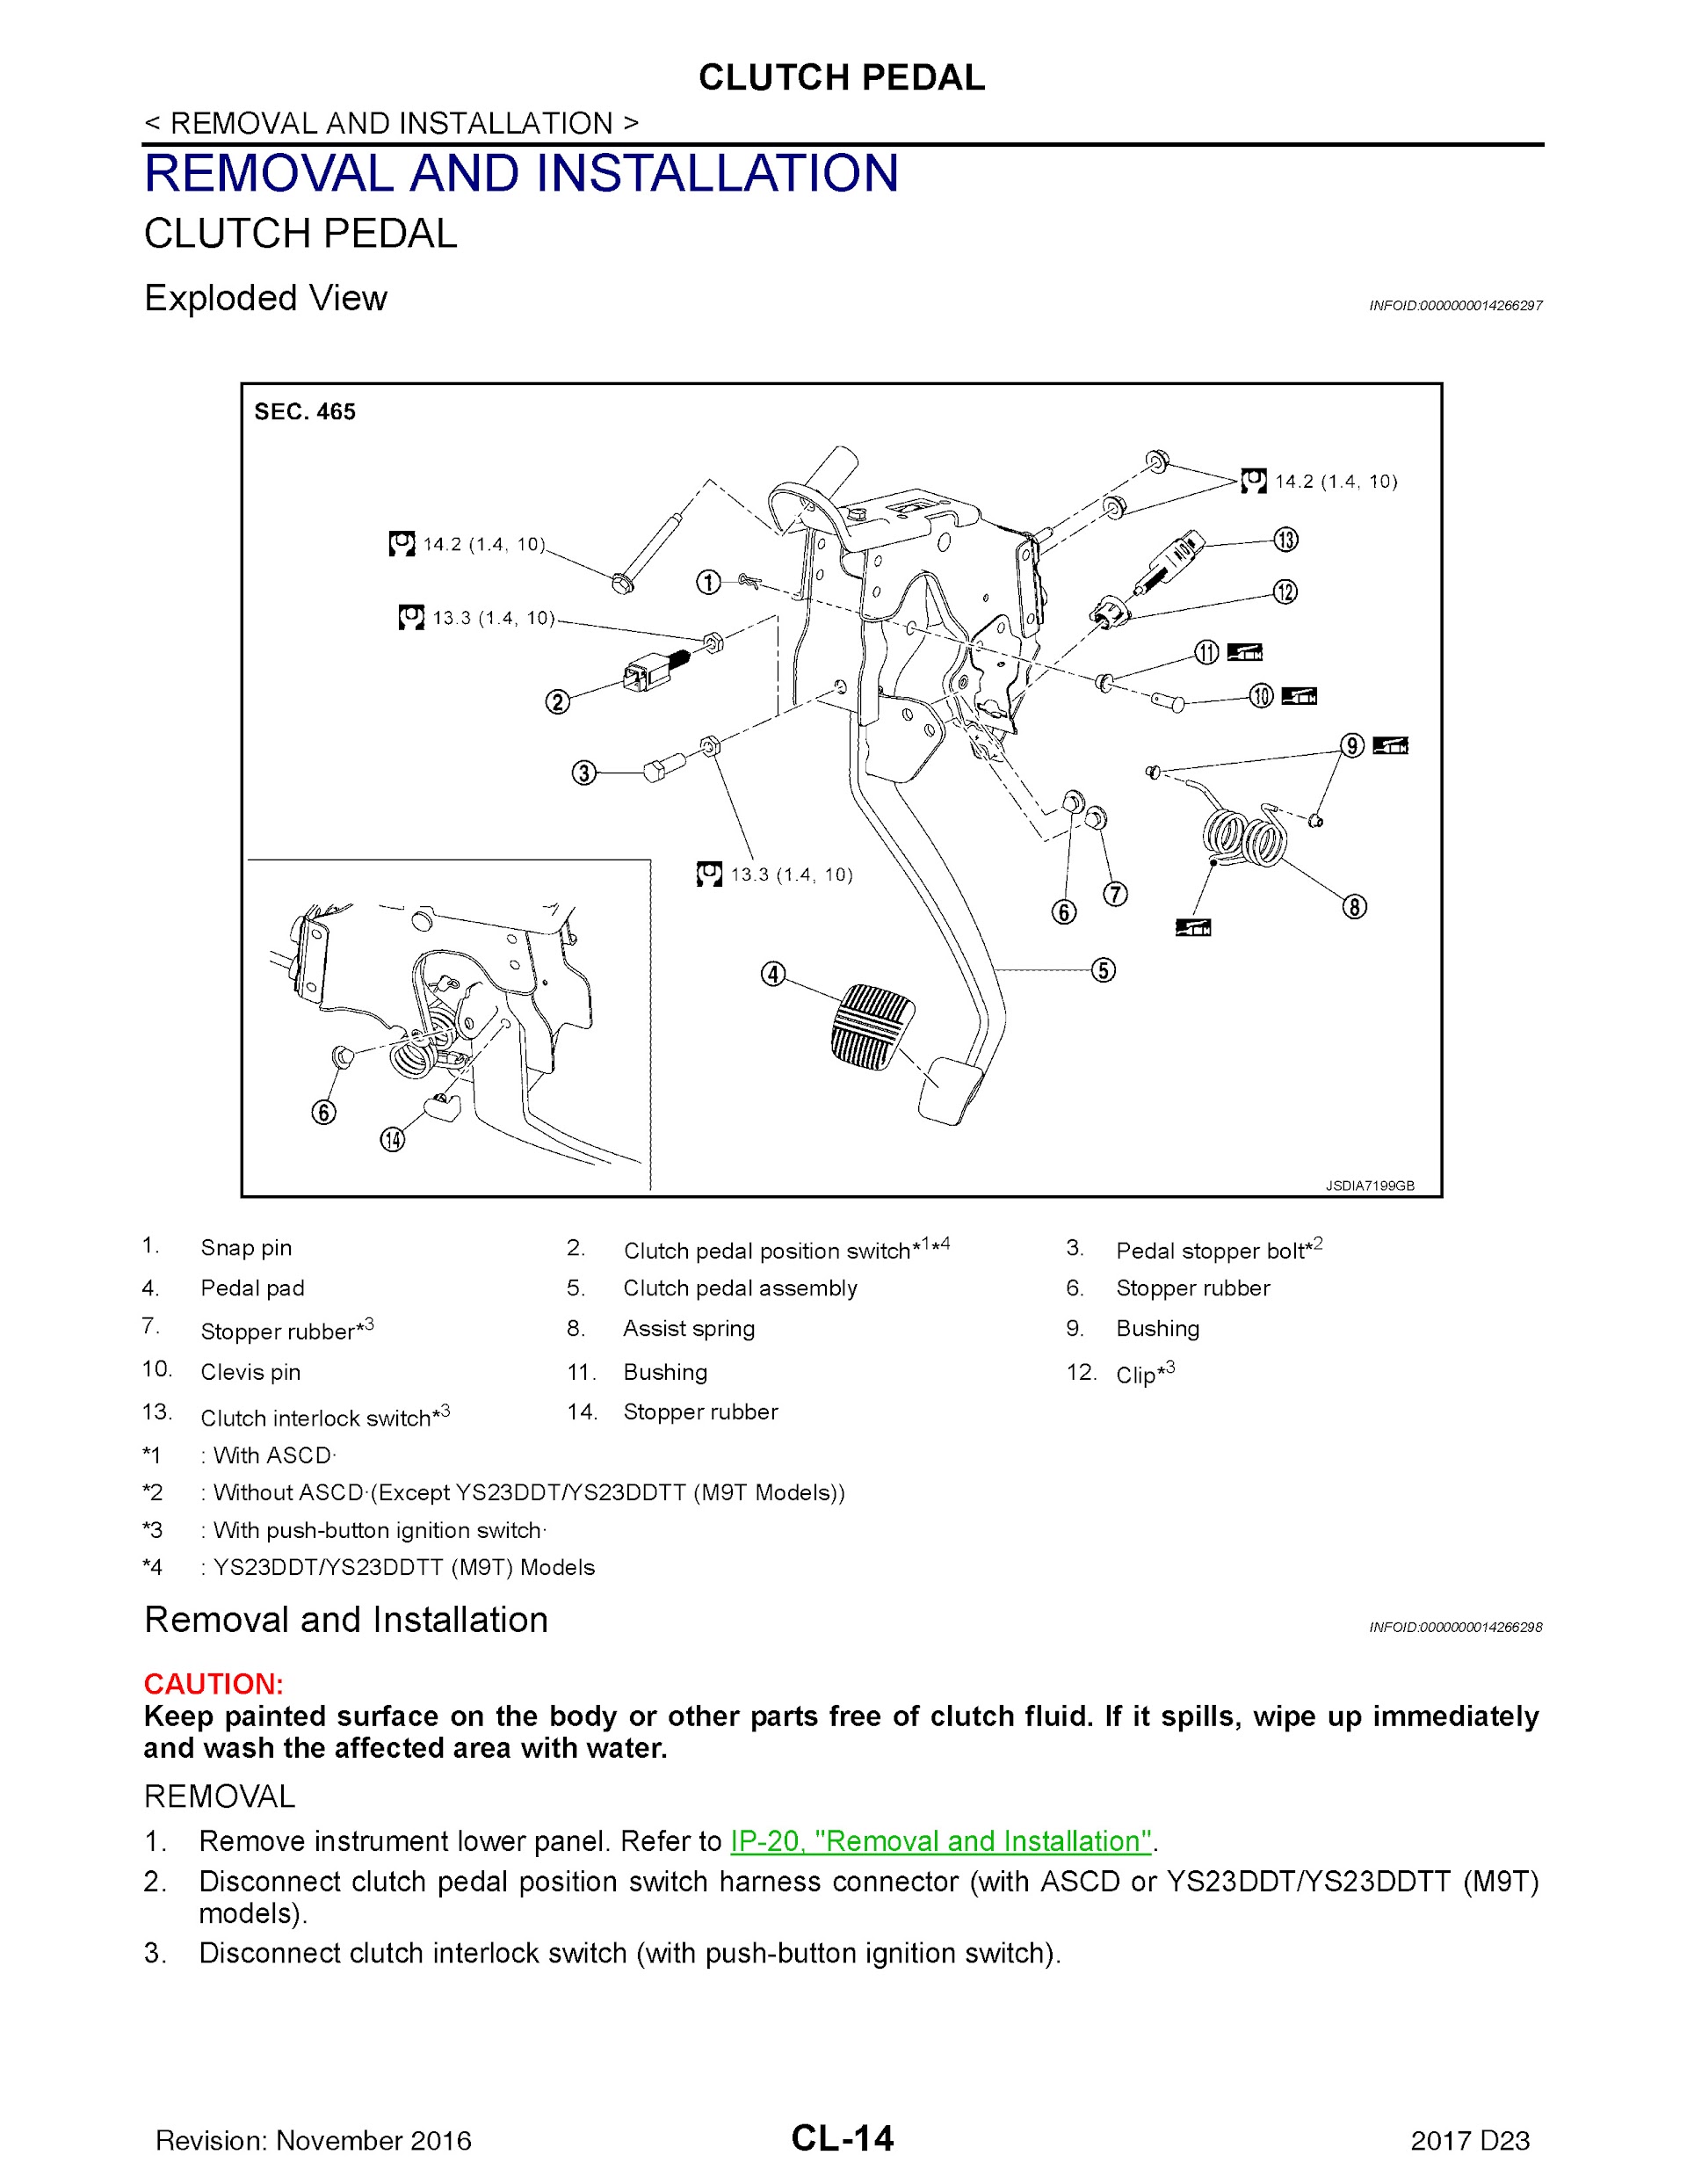 2015-2020 Nissan Navara NP300 repair manual, Clutch Pedal Removal and Installation